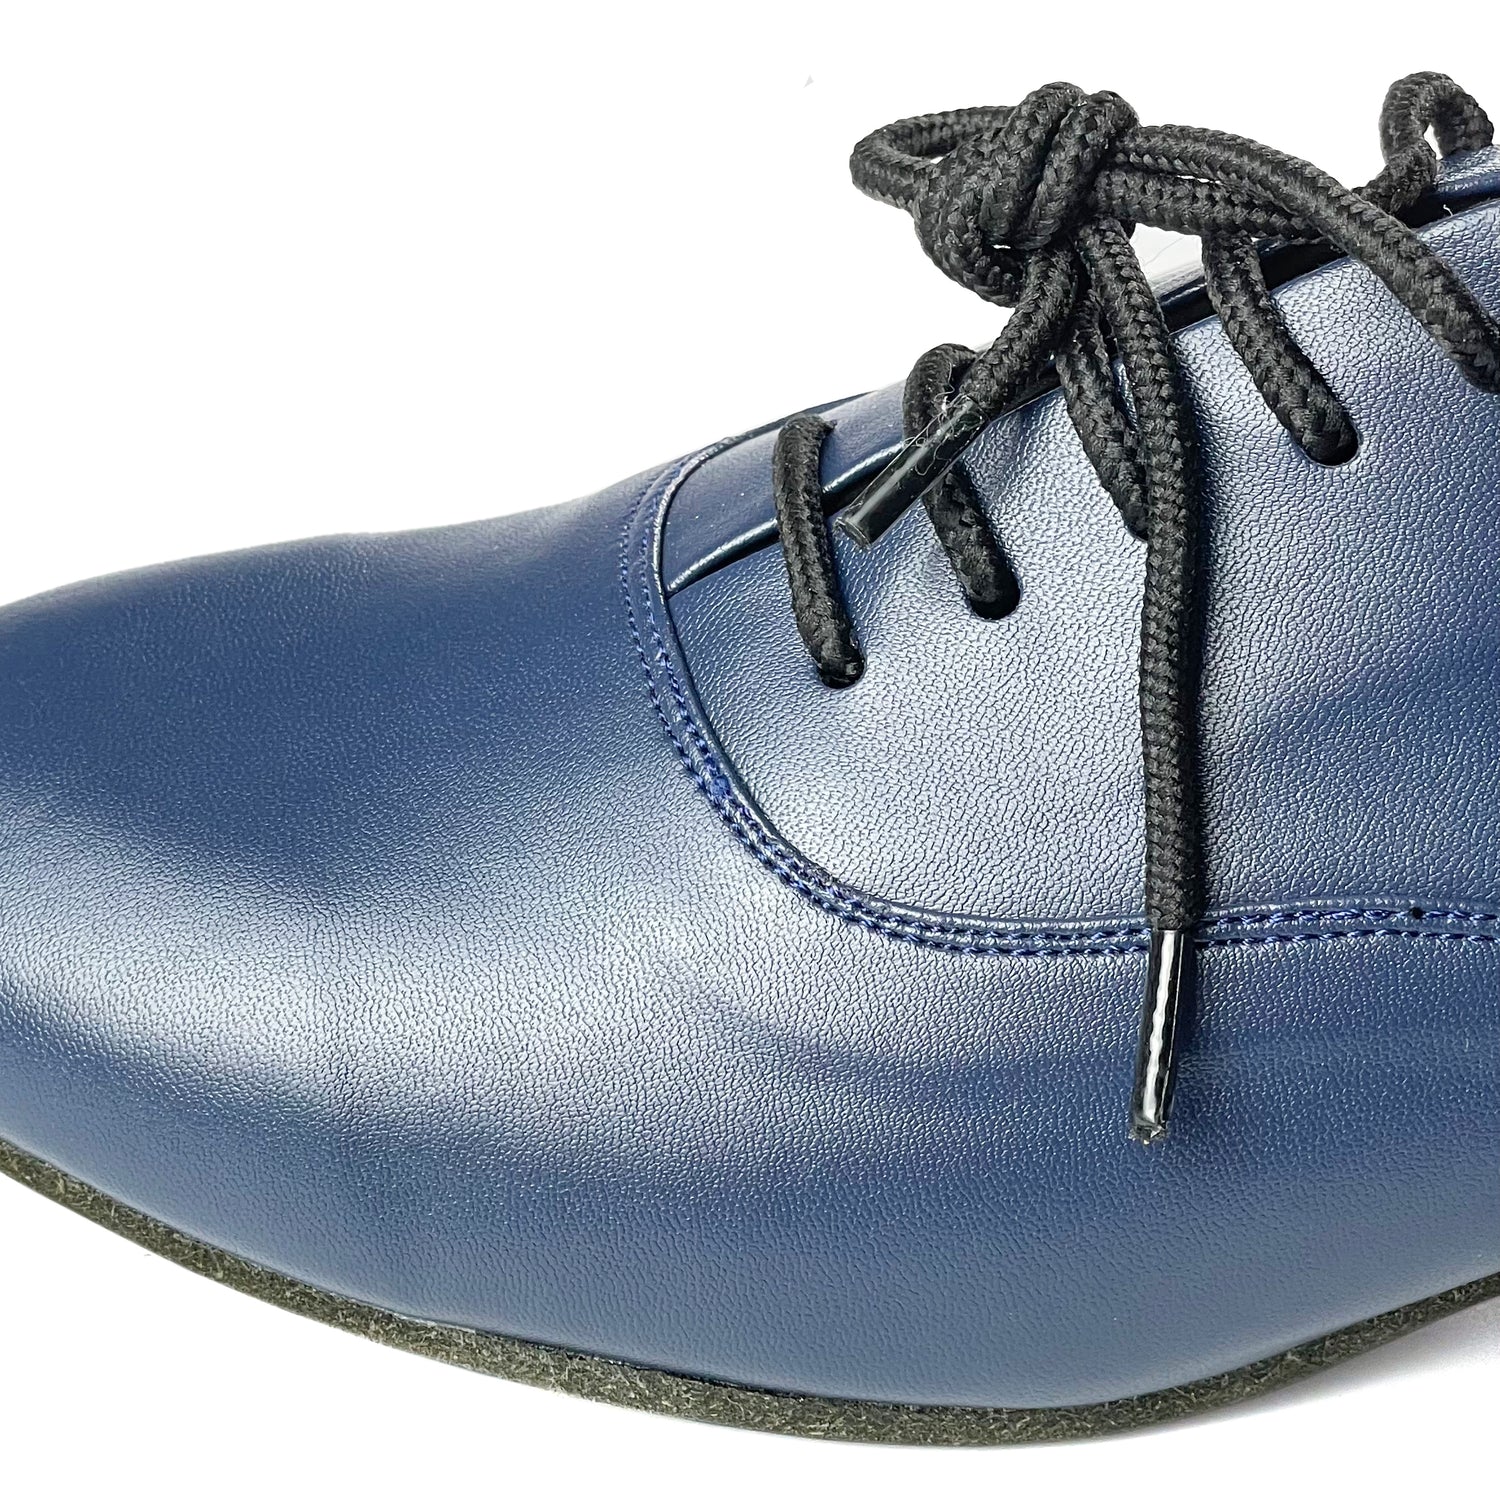 Pro Dancer Men's Blue Leather Tango Shoes with 1 Inch Heel PD-1004C0